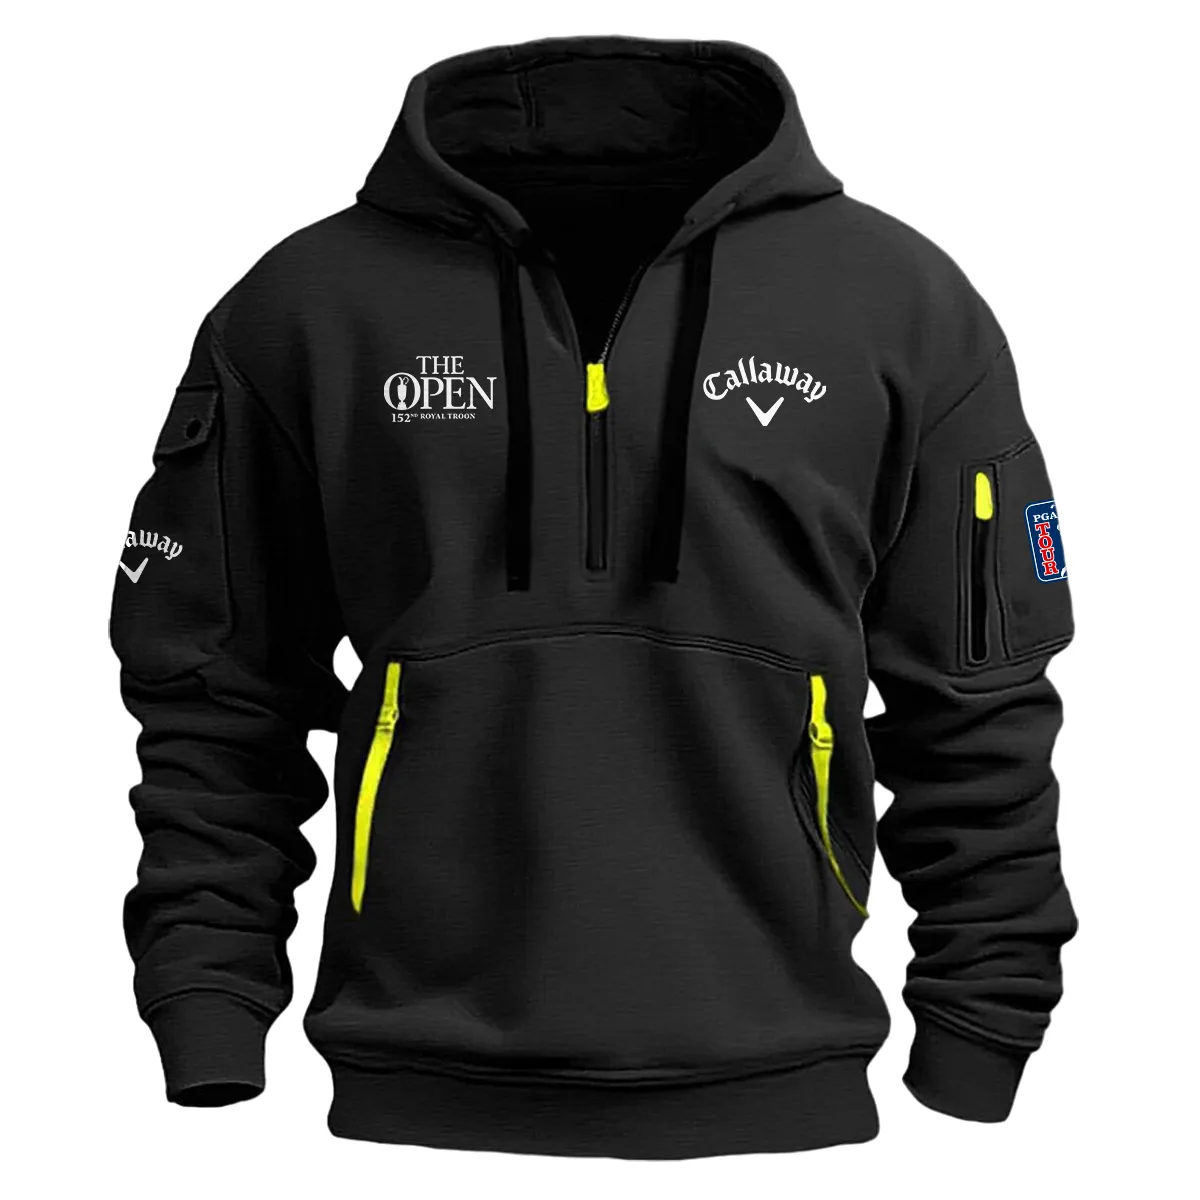 Black Color Callaway Fashion Hoodie Half Zipper 152nd The Open Championship Gift For Fans